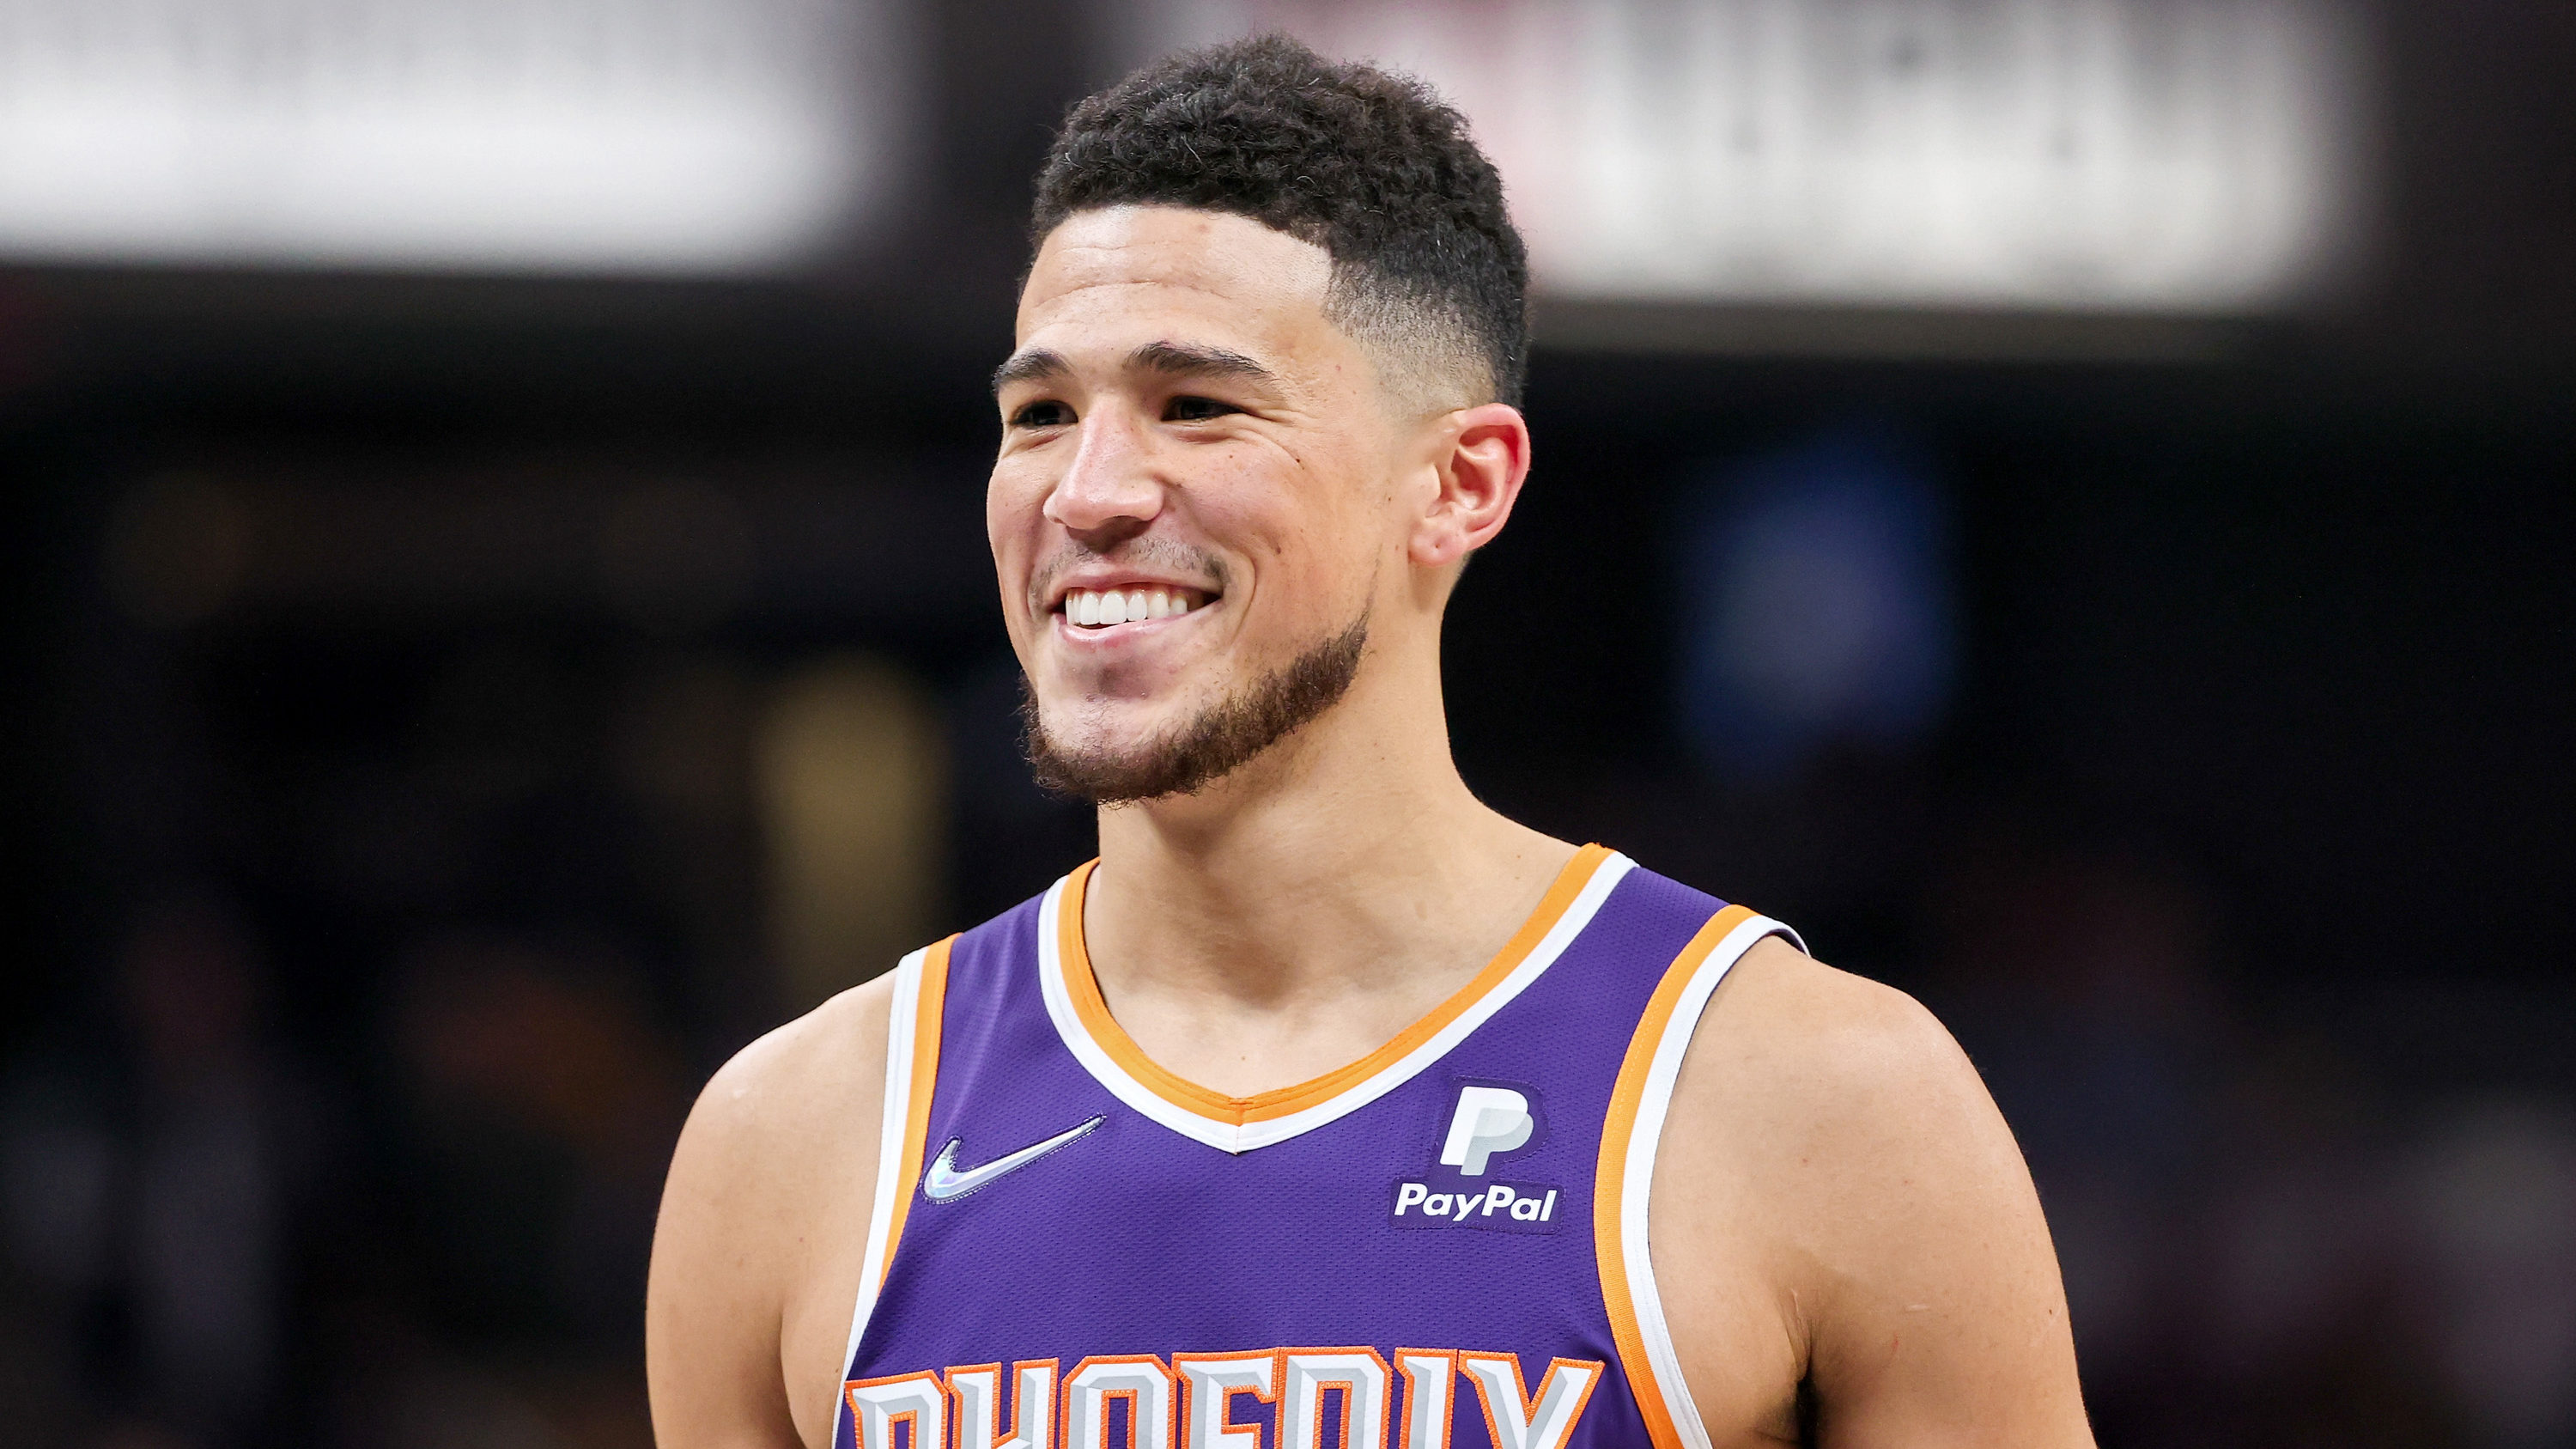 49-facts-about-devin-booker